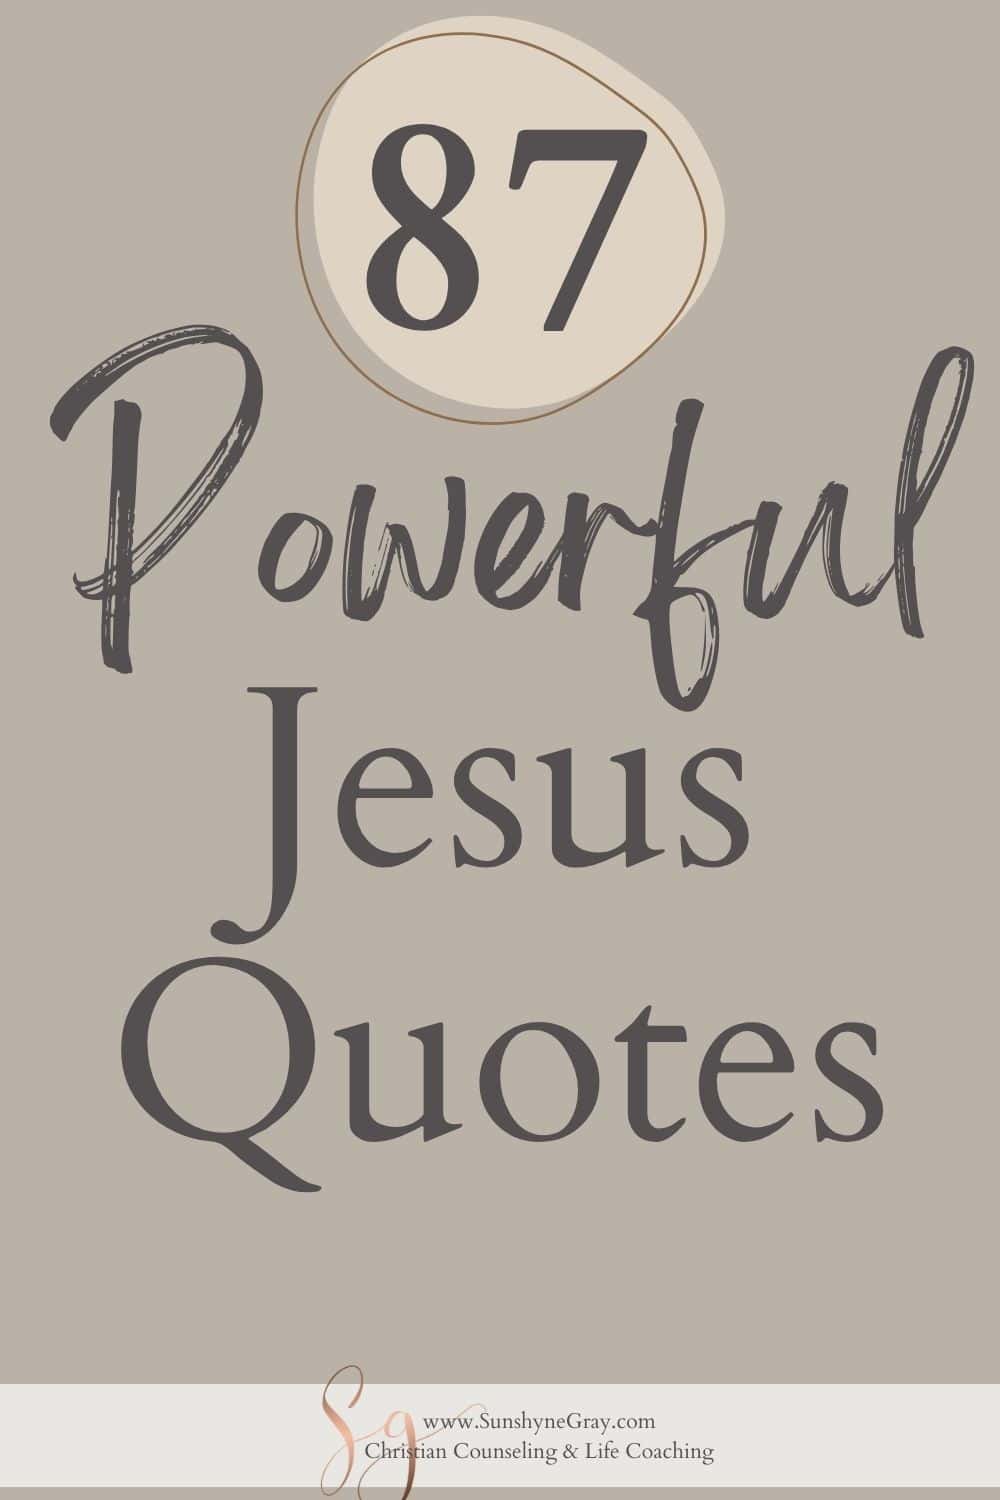 Jesus Quotes from the Bible - Christian Counseling